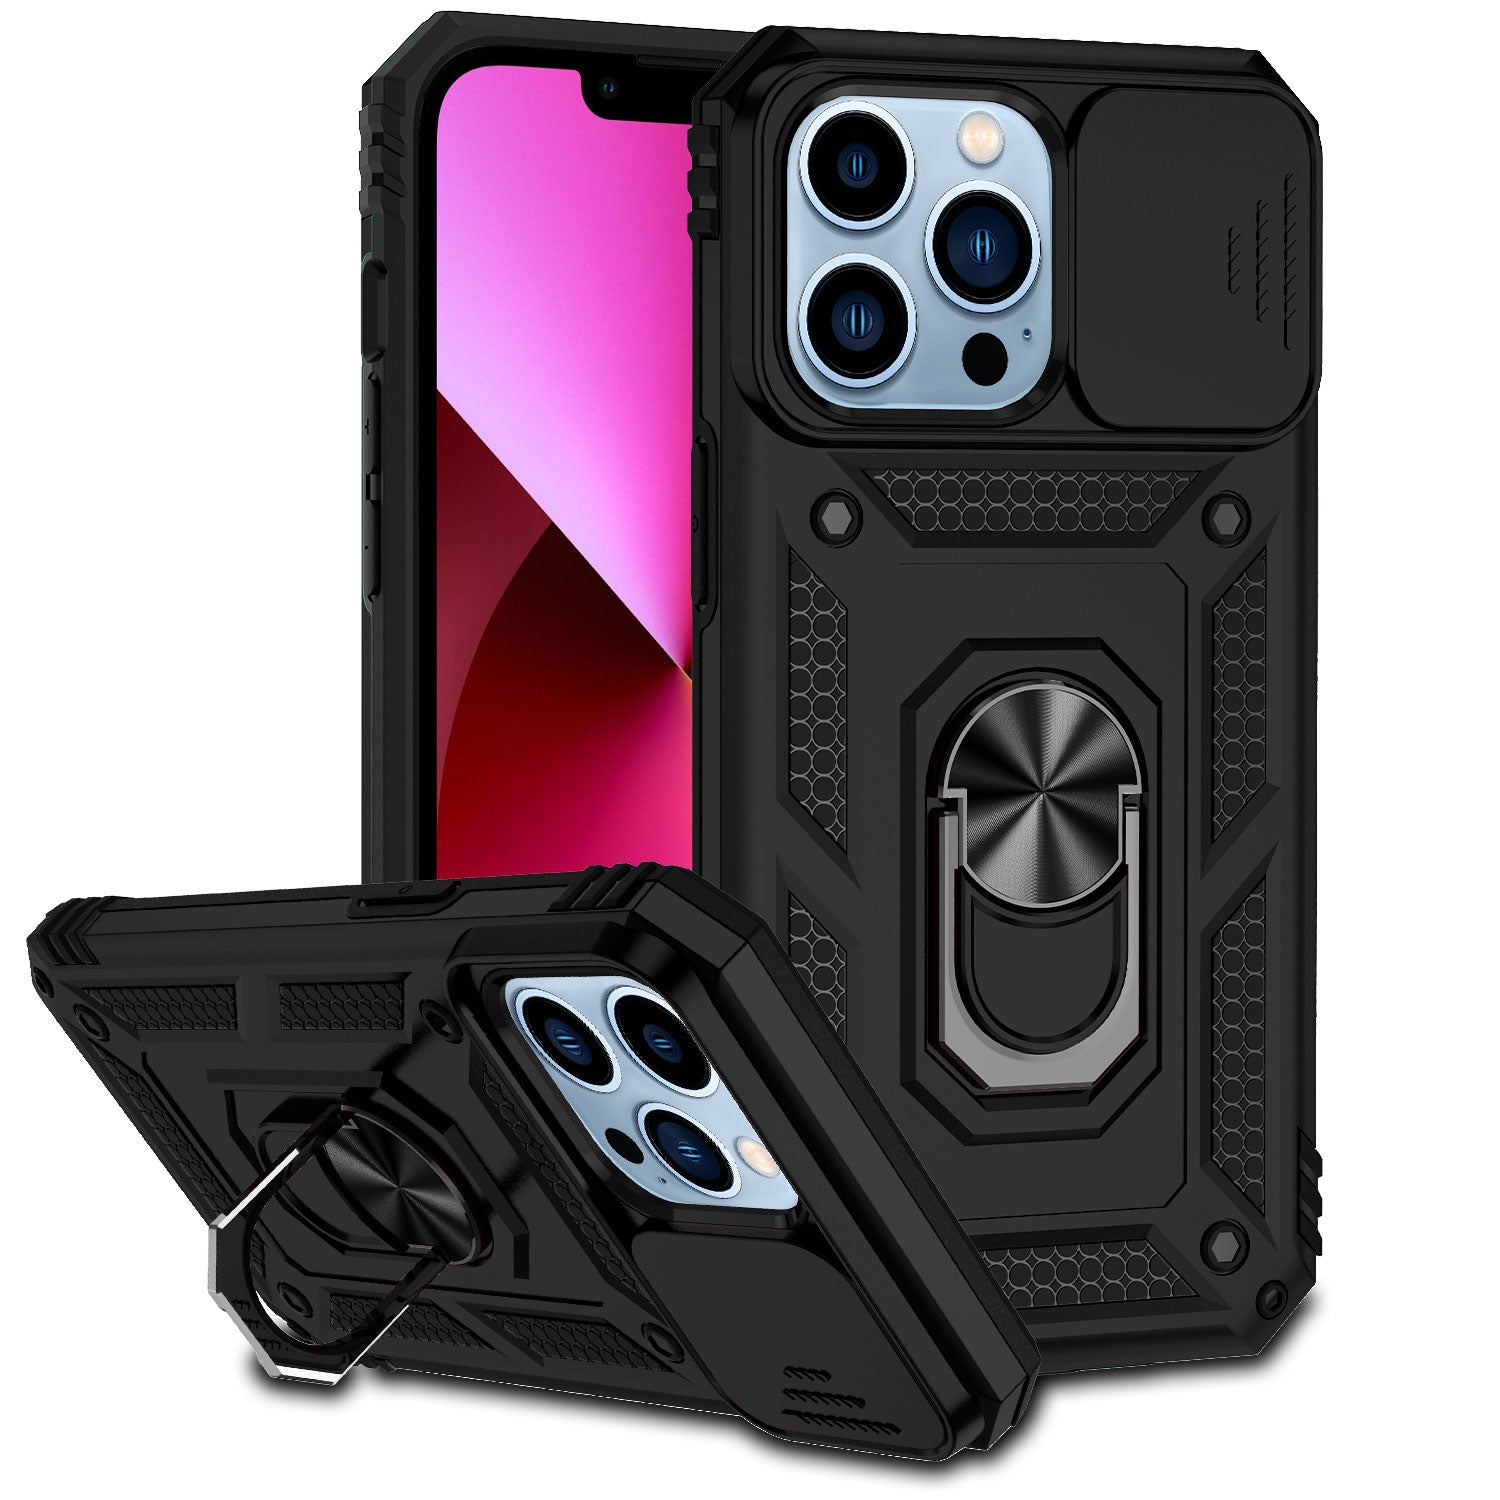 Magentic Ring Stand Camera Protective Case For iPhone 11